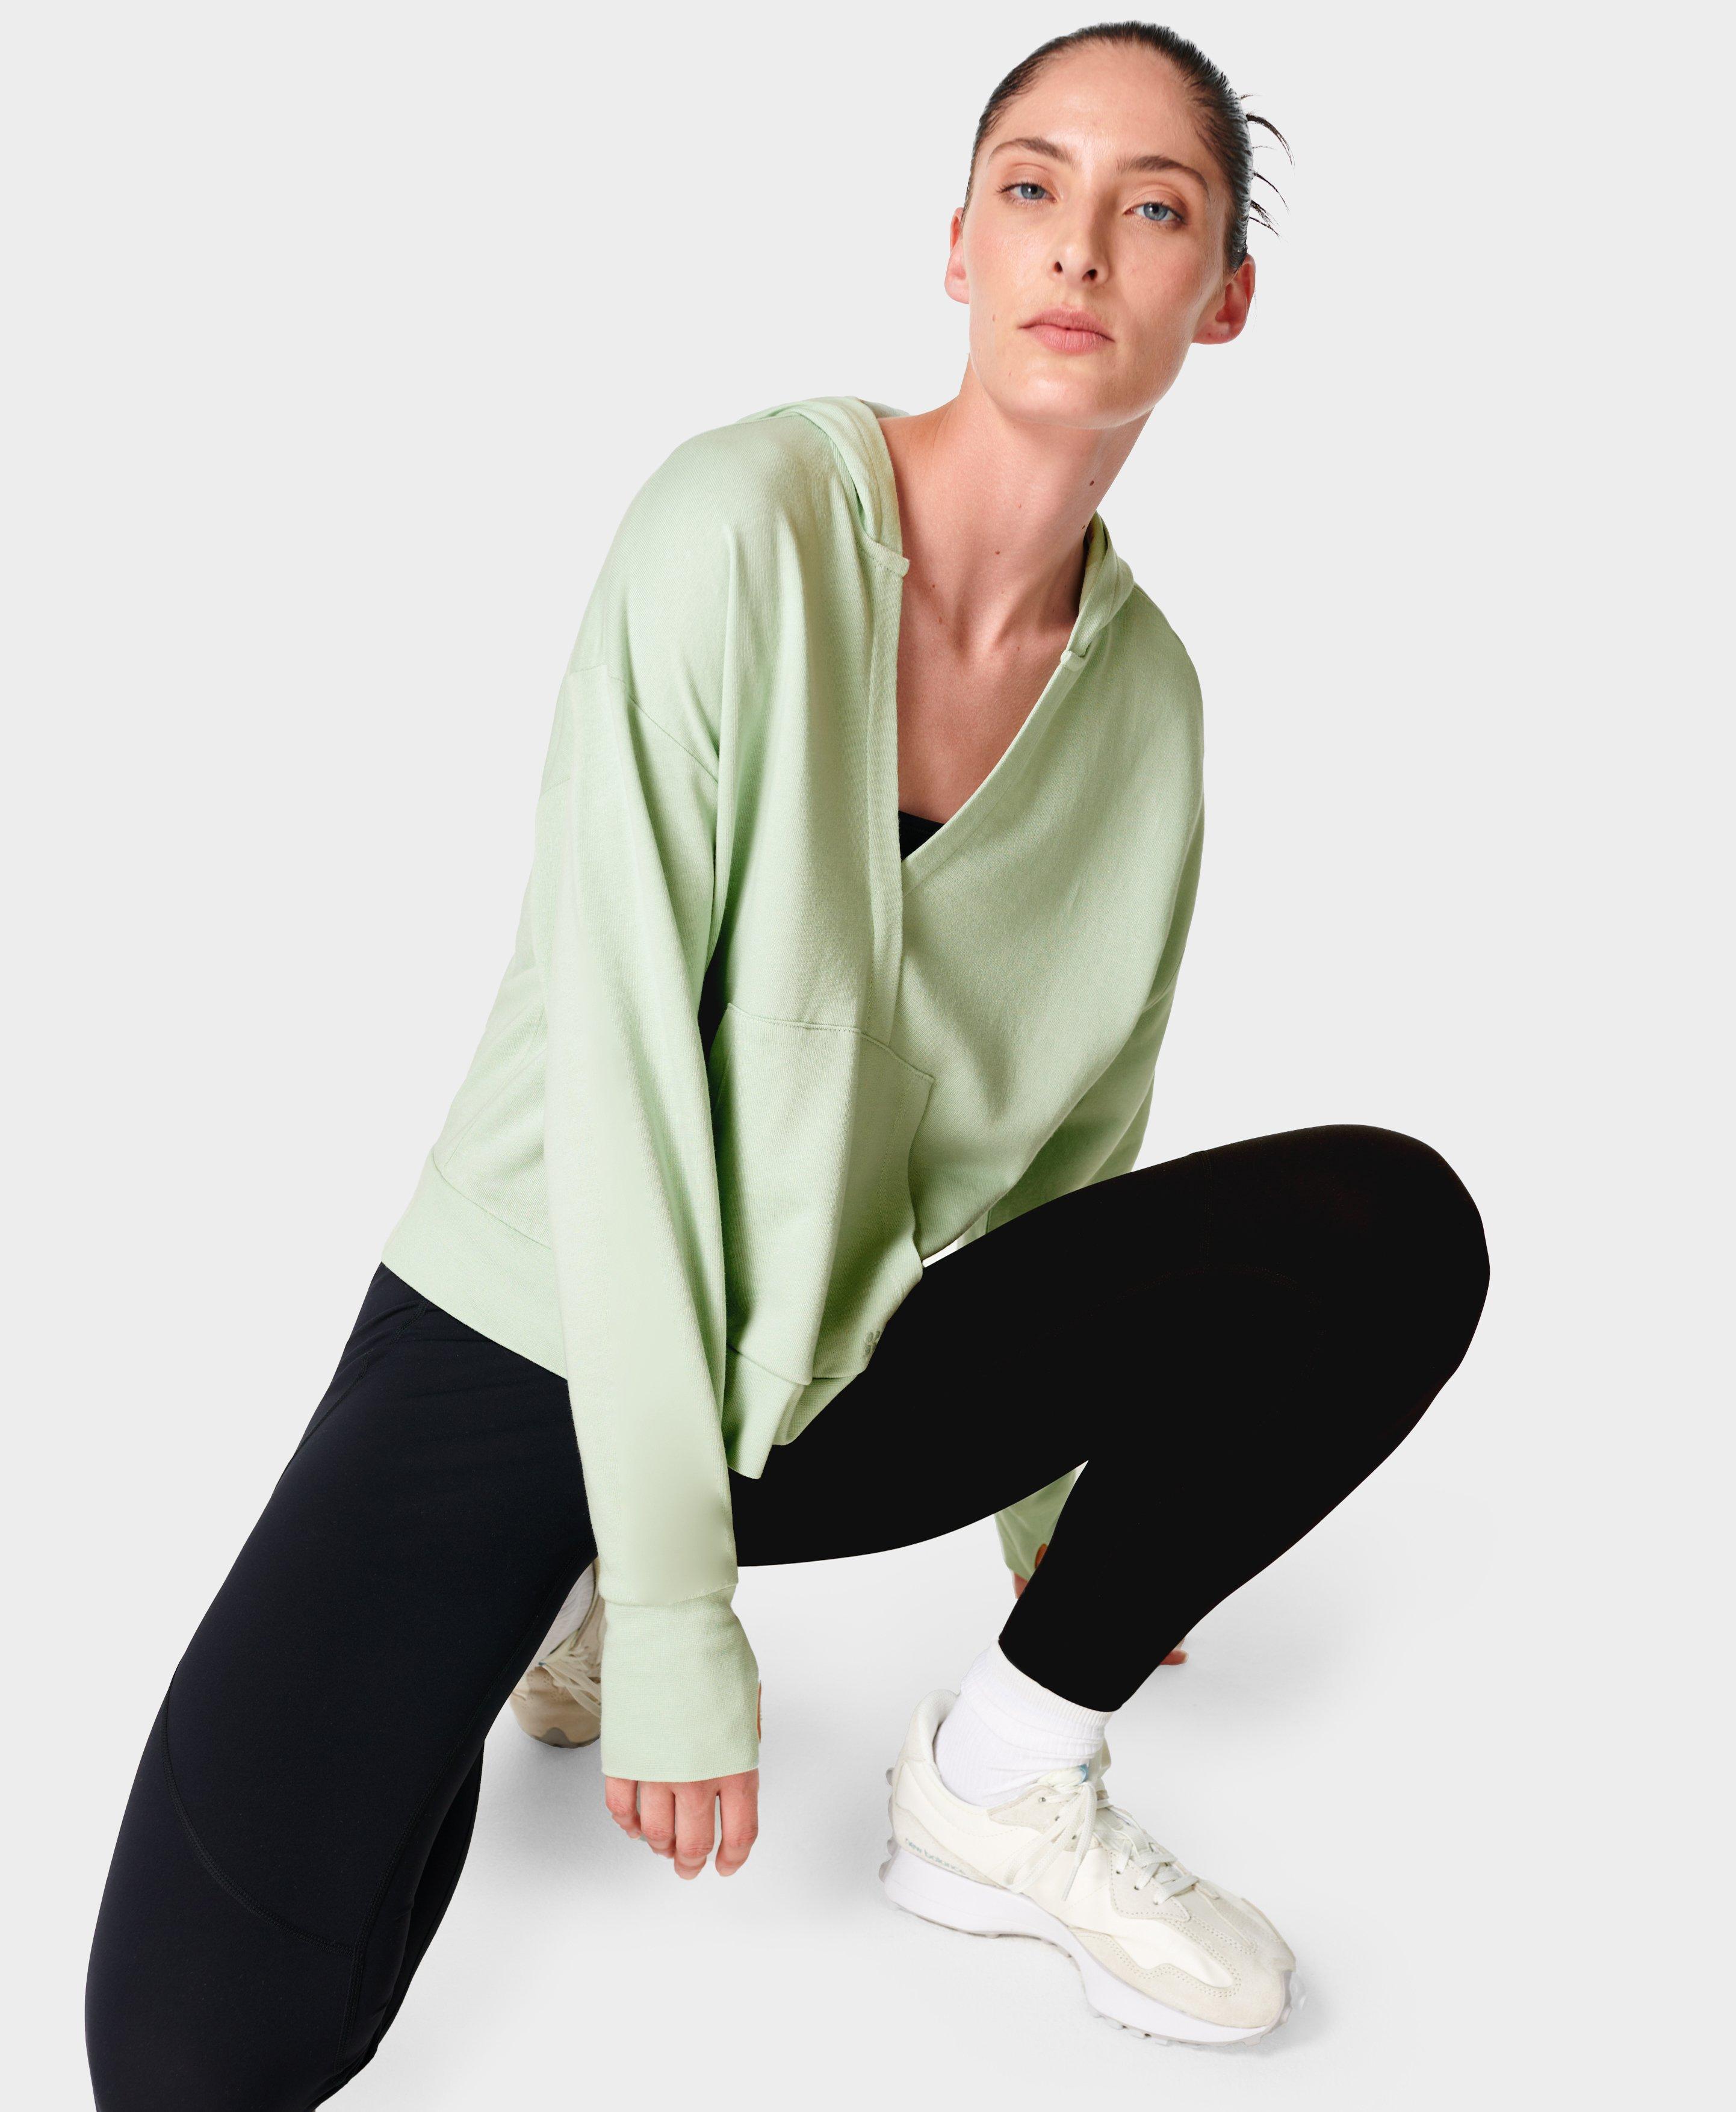 Sweaty Betty Sale $60 or Less - Shop up to 60% off